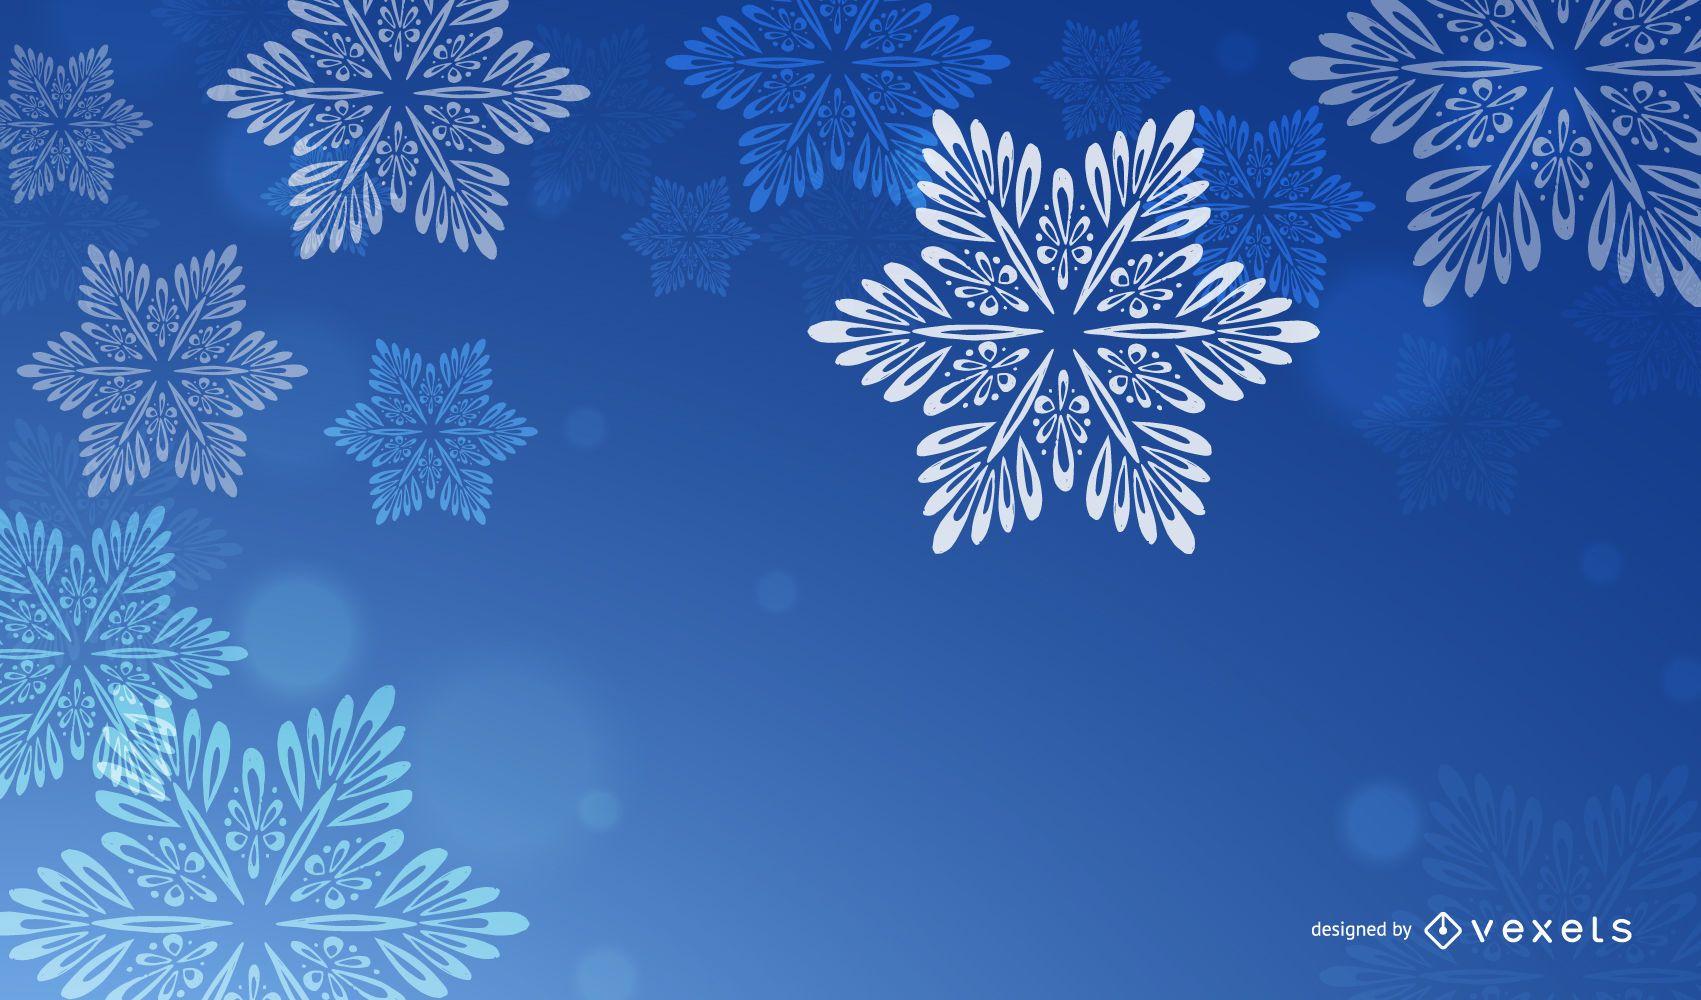 Blue Christmas Backgrounds with White Snowflakes